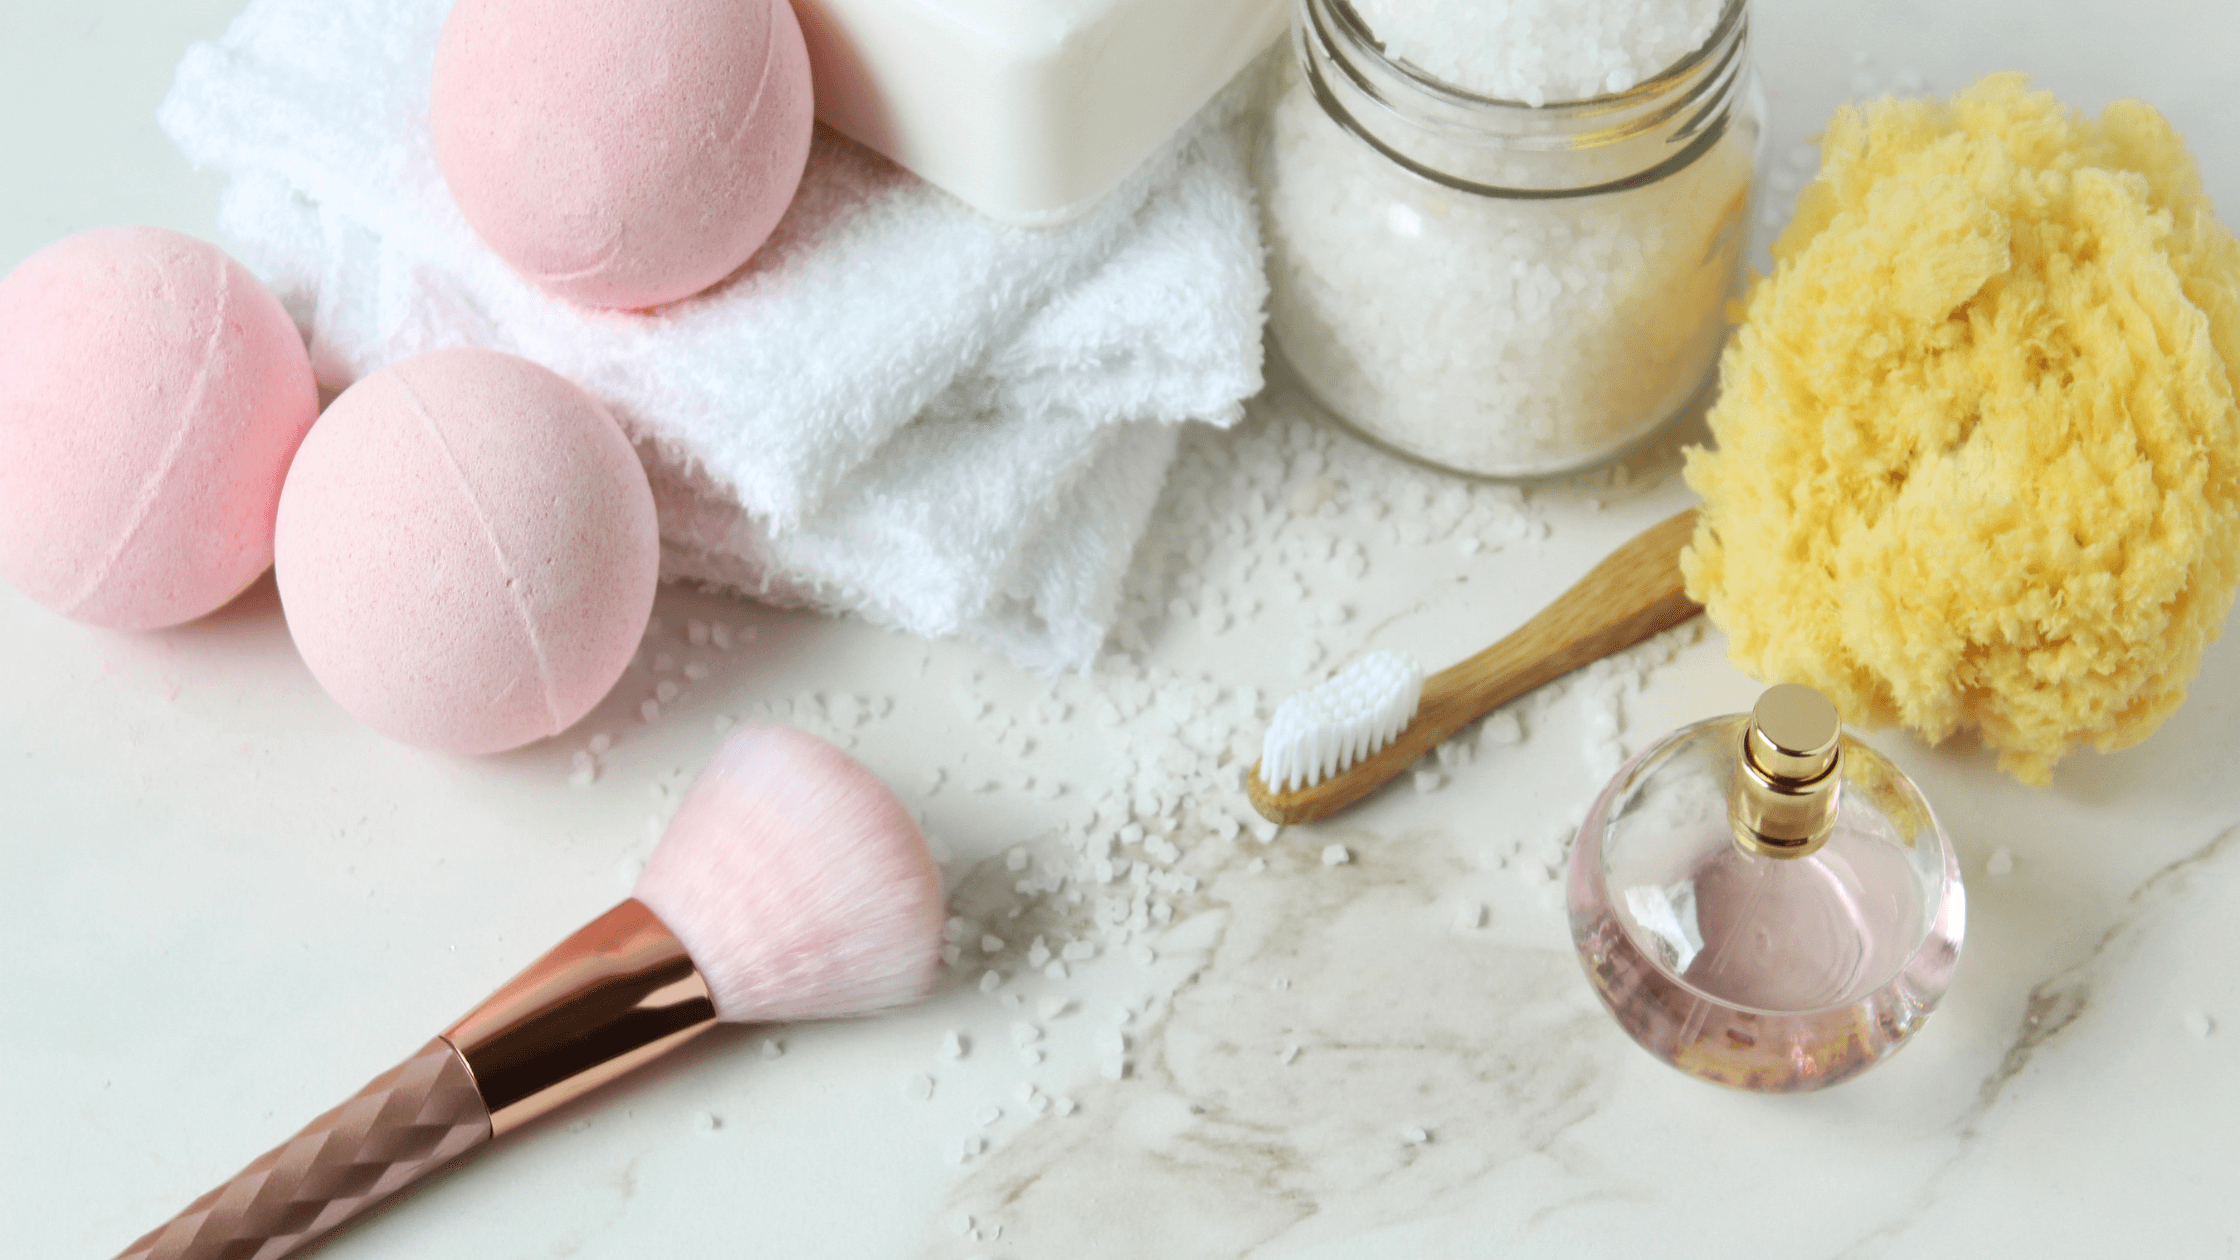 How to Make the Ultimate At-Home Spa for a Mental Health Refresh